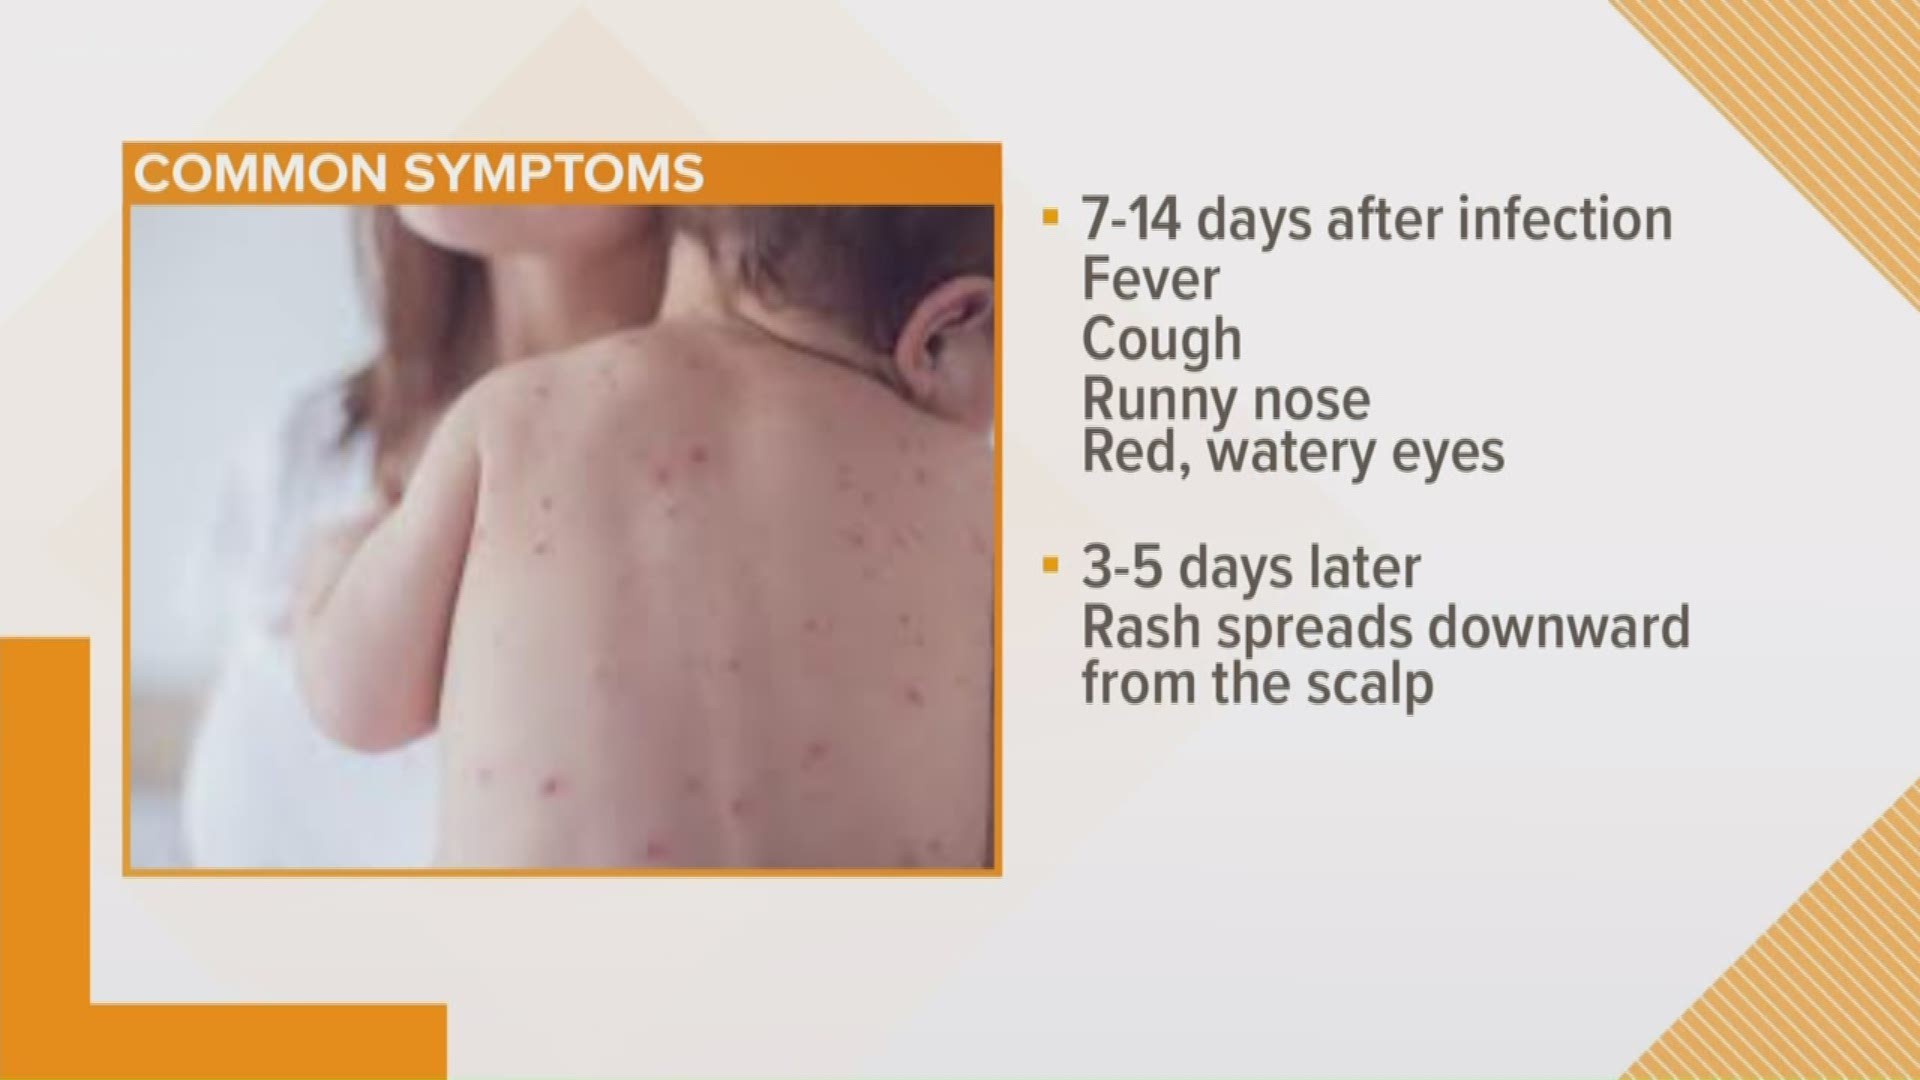 Dr. Michael Wasserman is breaking down the different stages and symptoms of the disease and what parents can do to protect their children from the fast spreading virus.